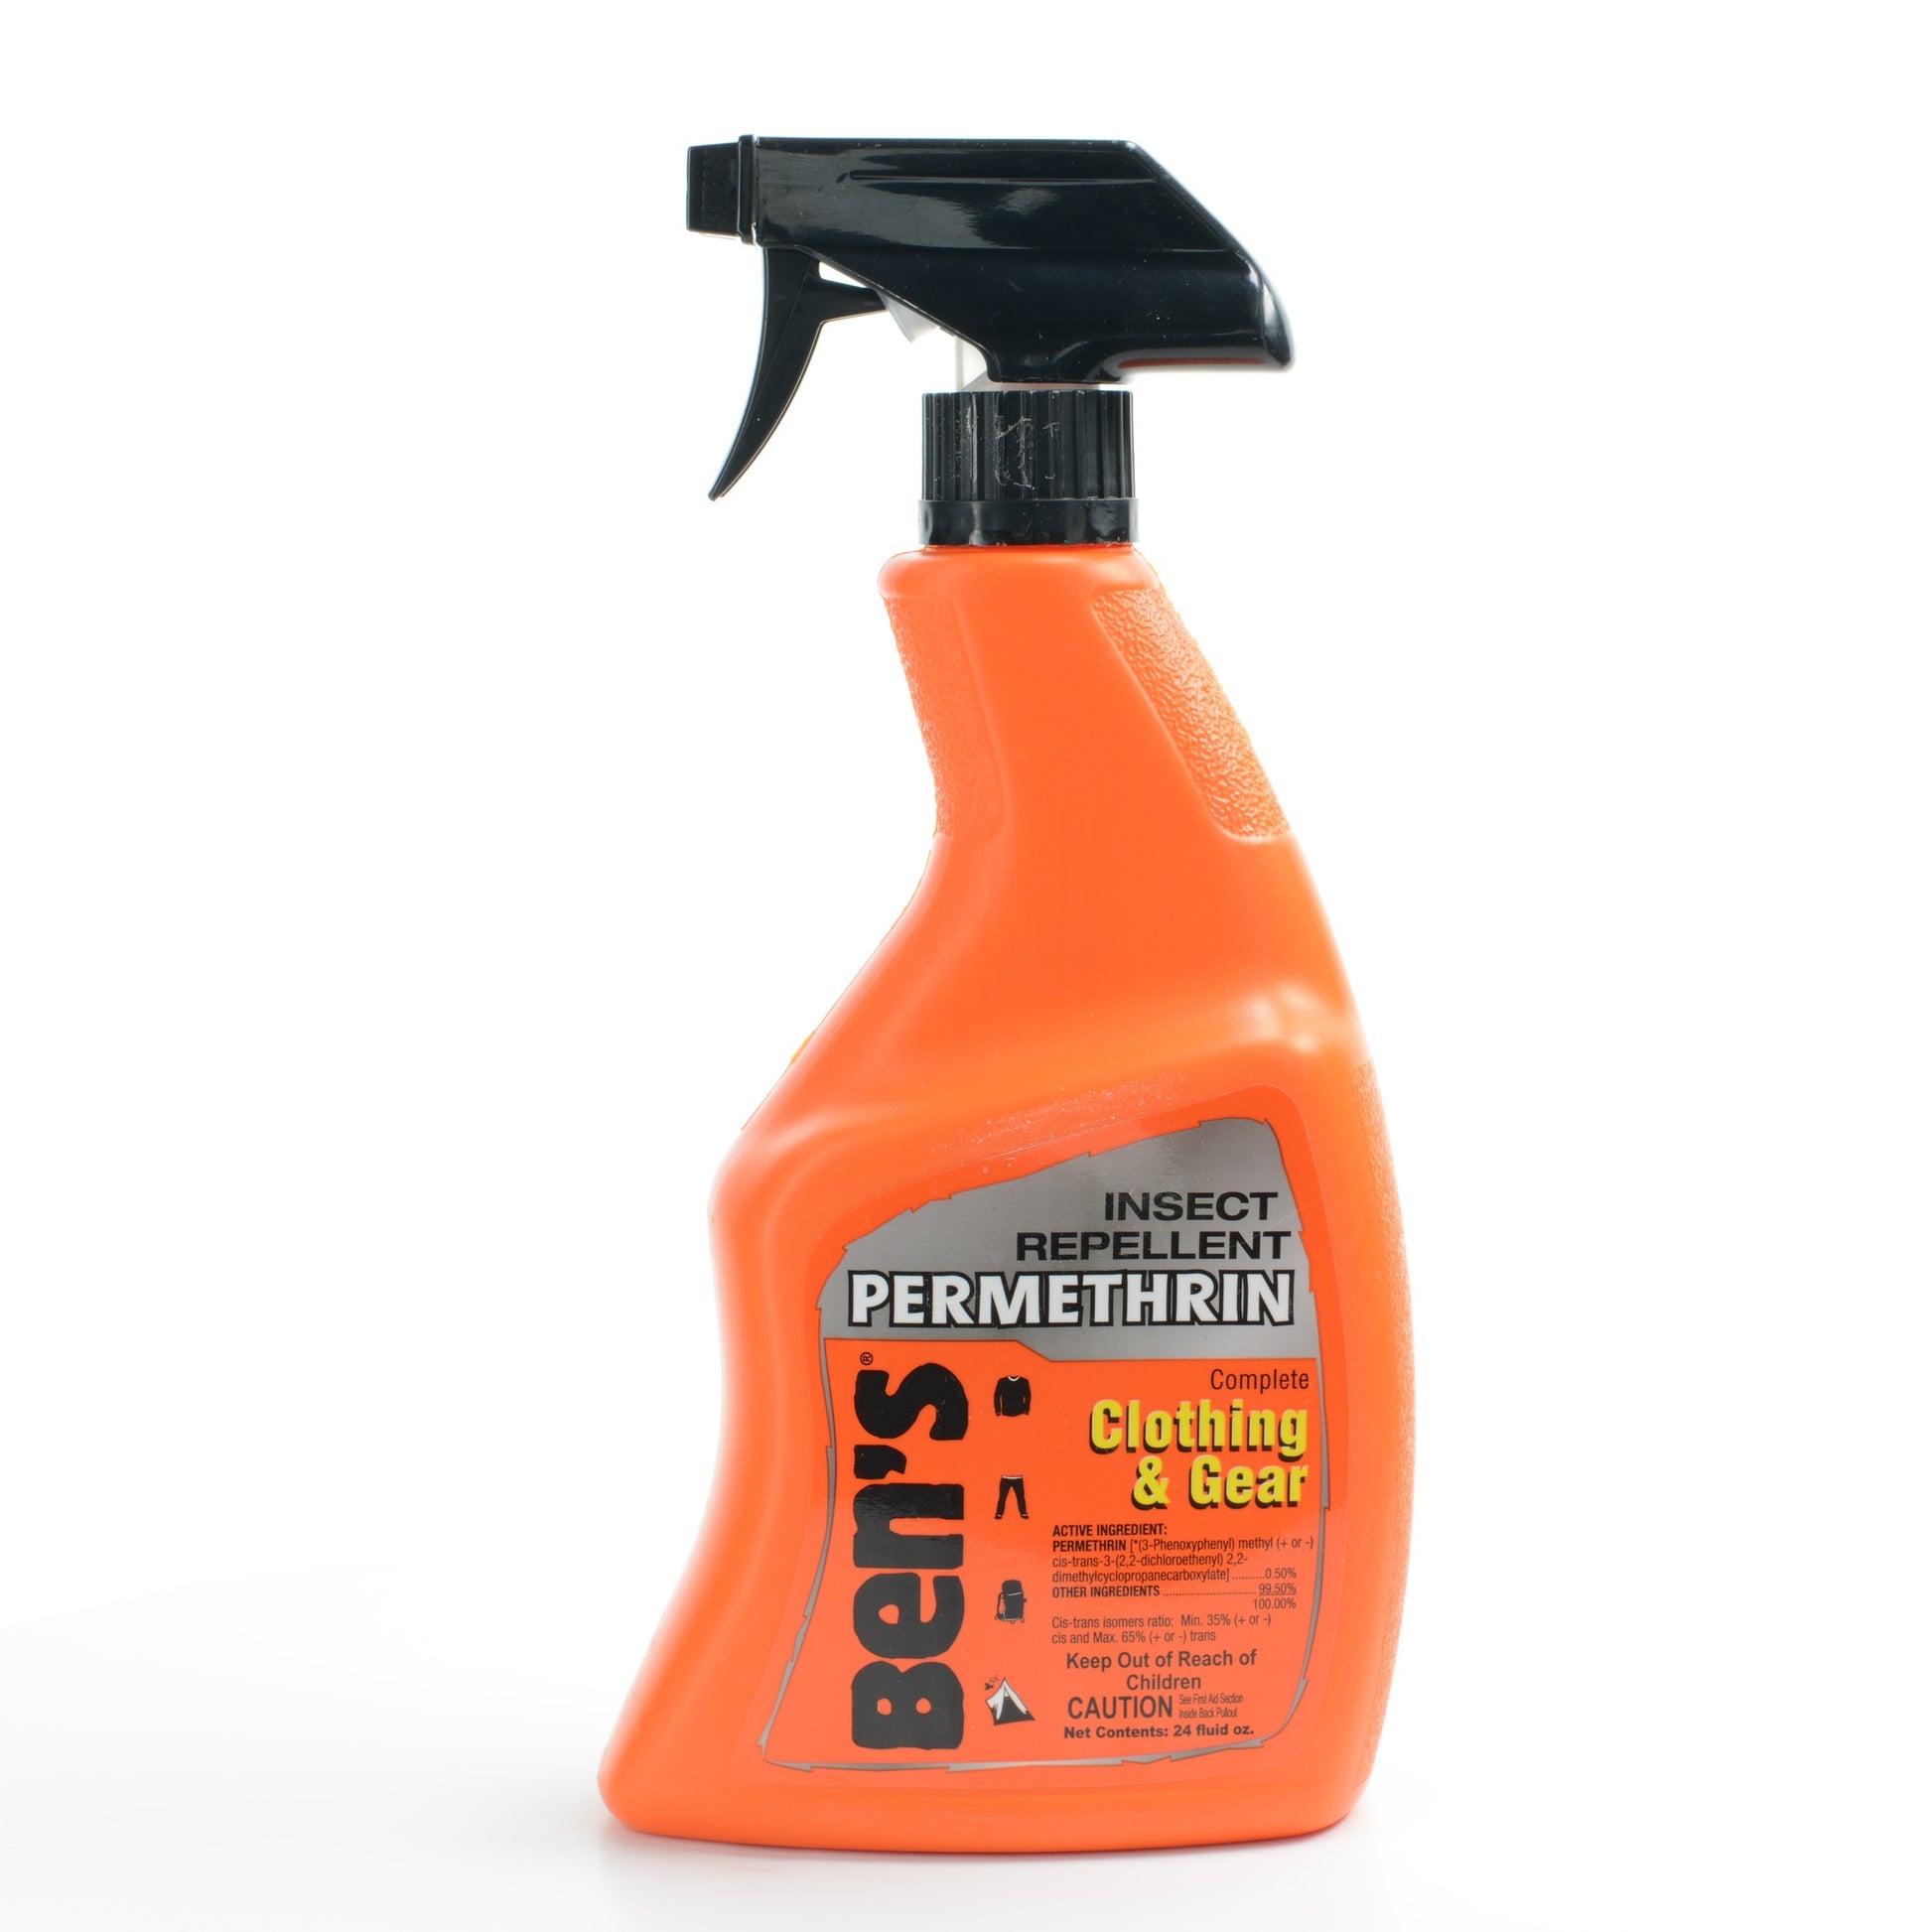 Bens 24 0unce Permethrin Insect Repellent Spray